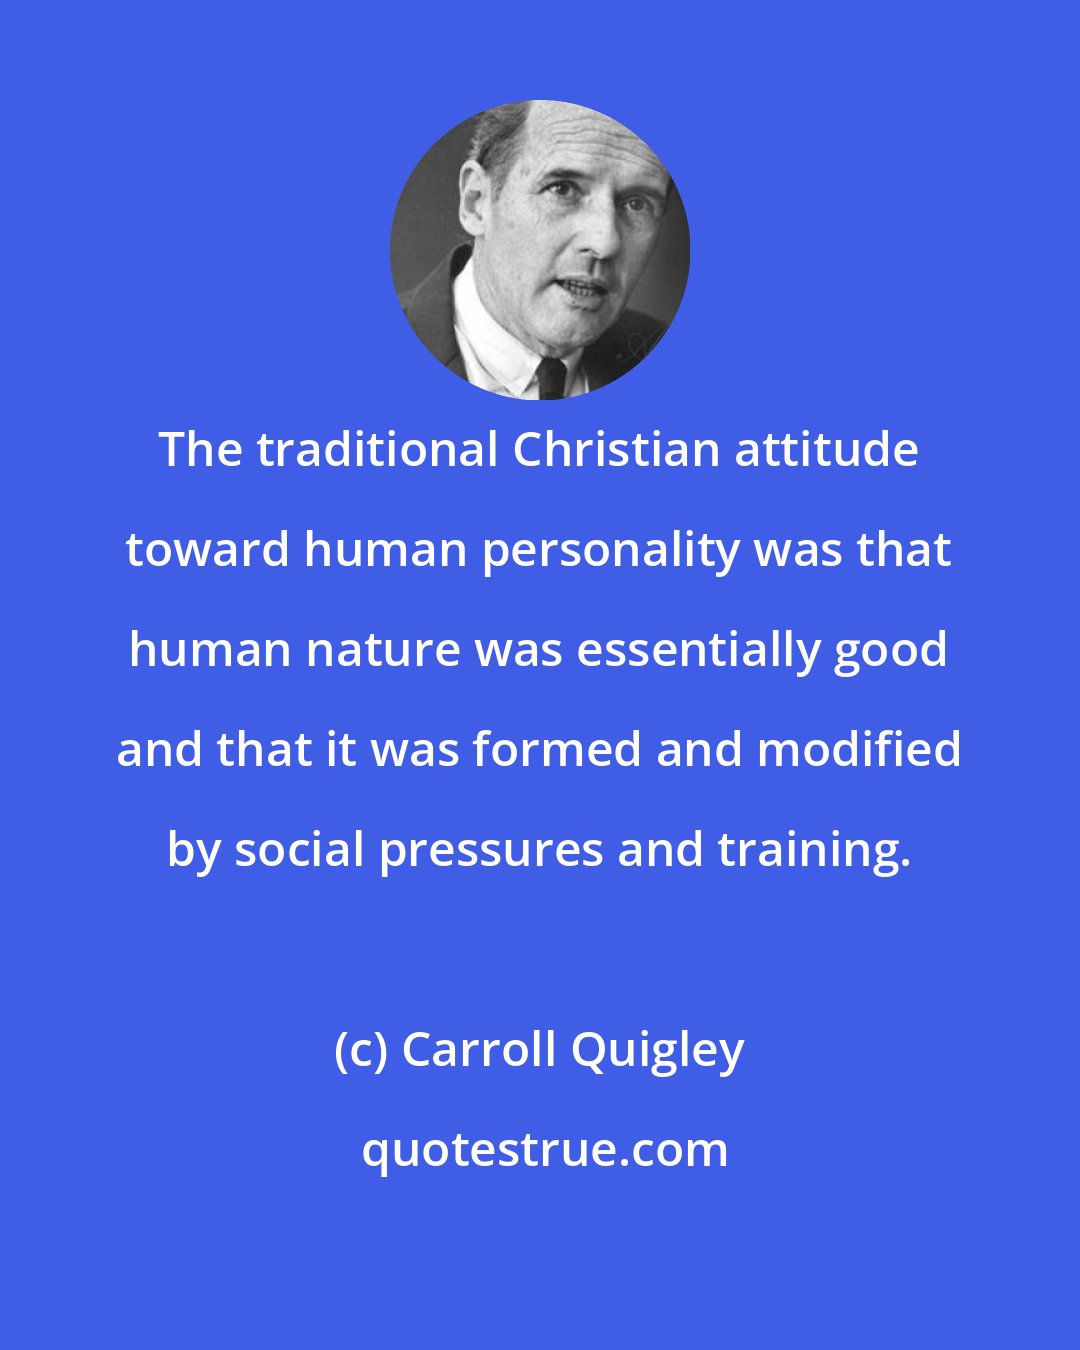 Carroll Quigley: The traditional Christian attitude toward human personality was that human nature was essentially good and that it was formed and modified by social pressures and training.